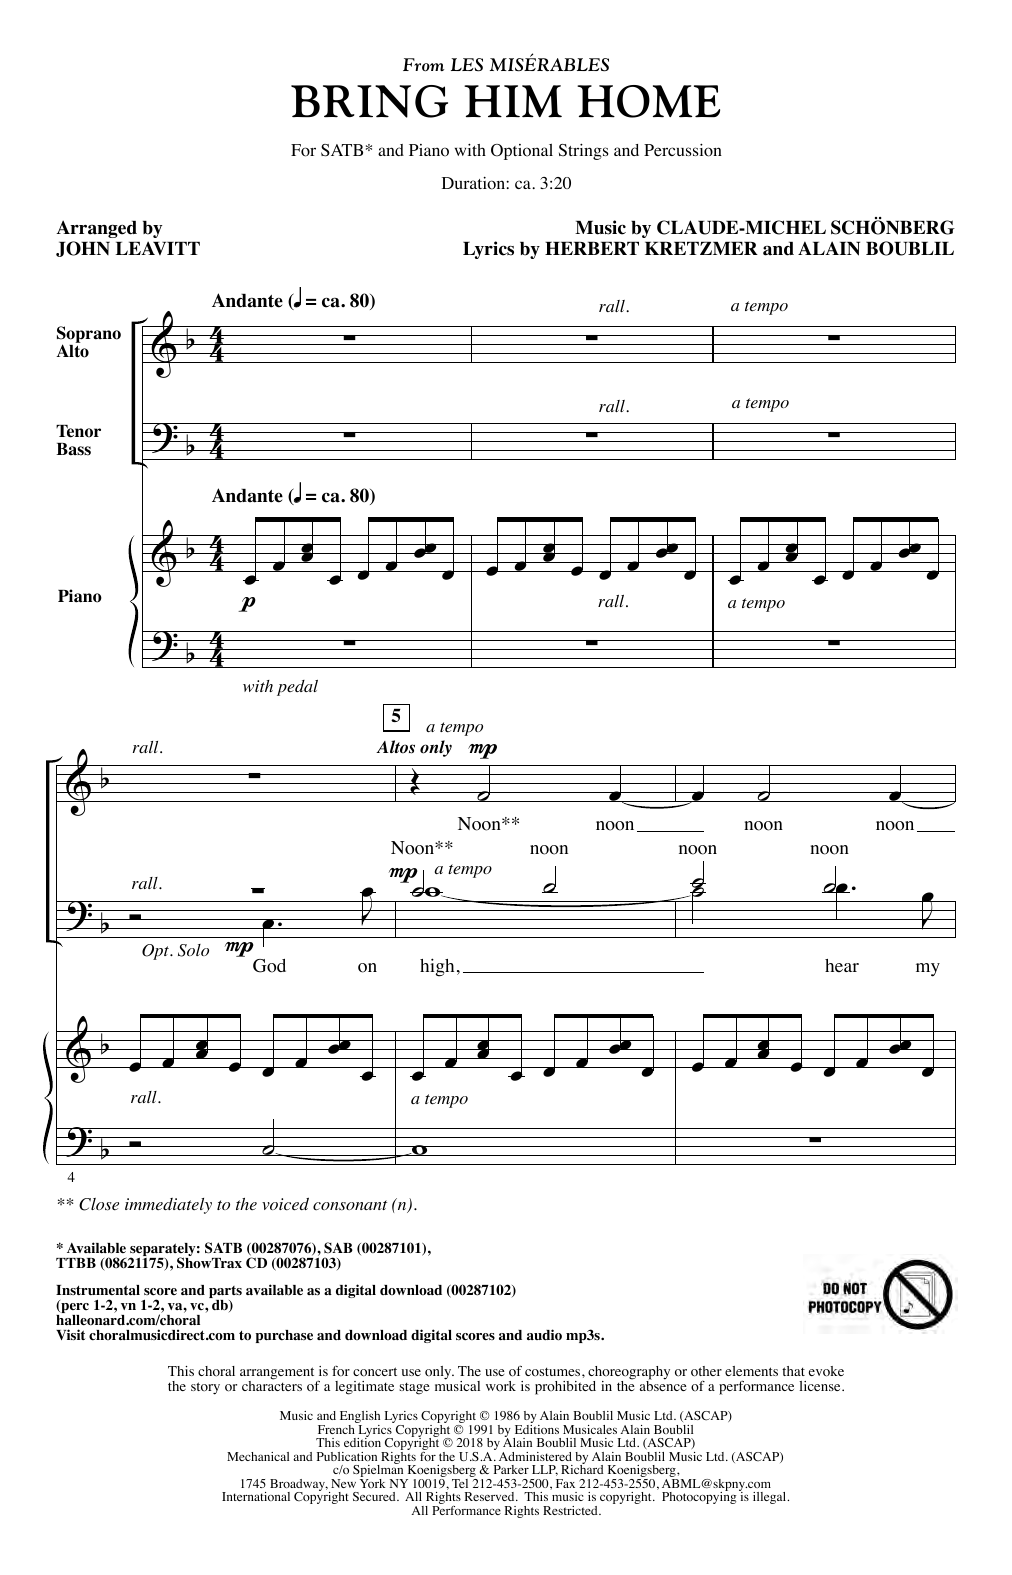 Download Boublil & Schonberg Bring Him Home (from Les Miserables) (a Sheet Music